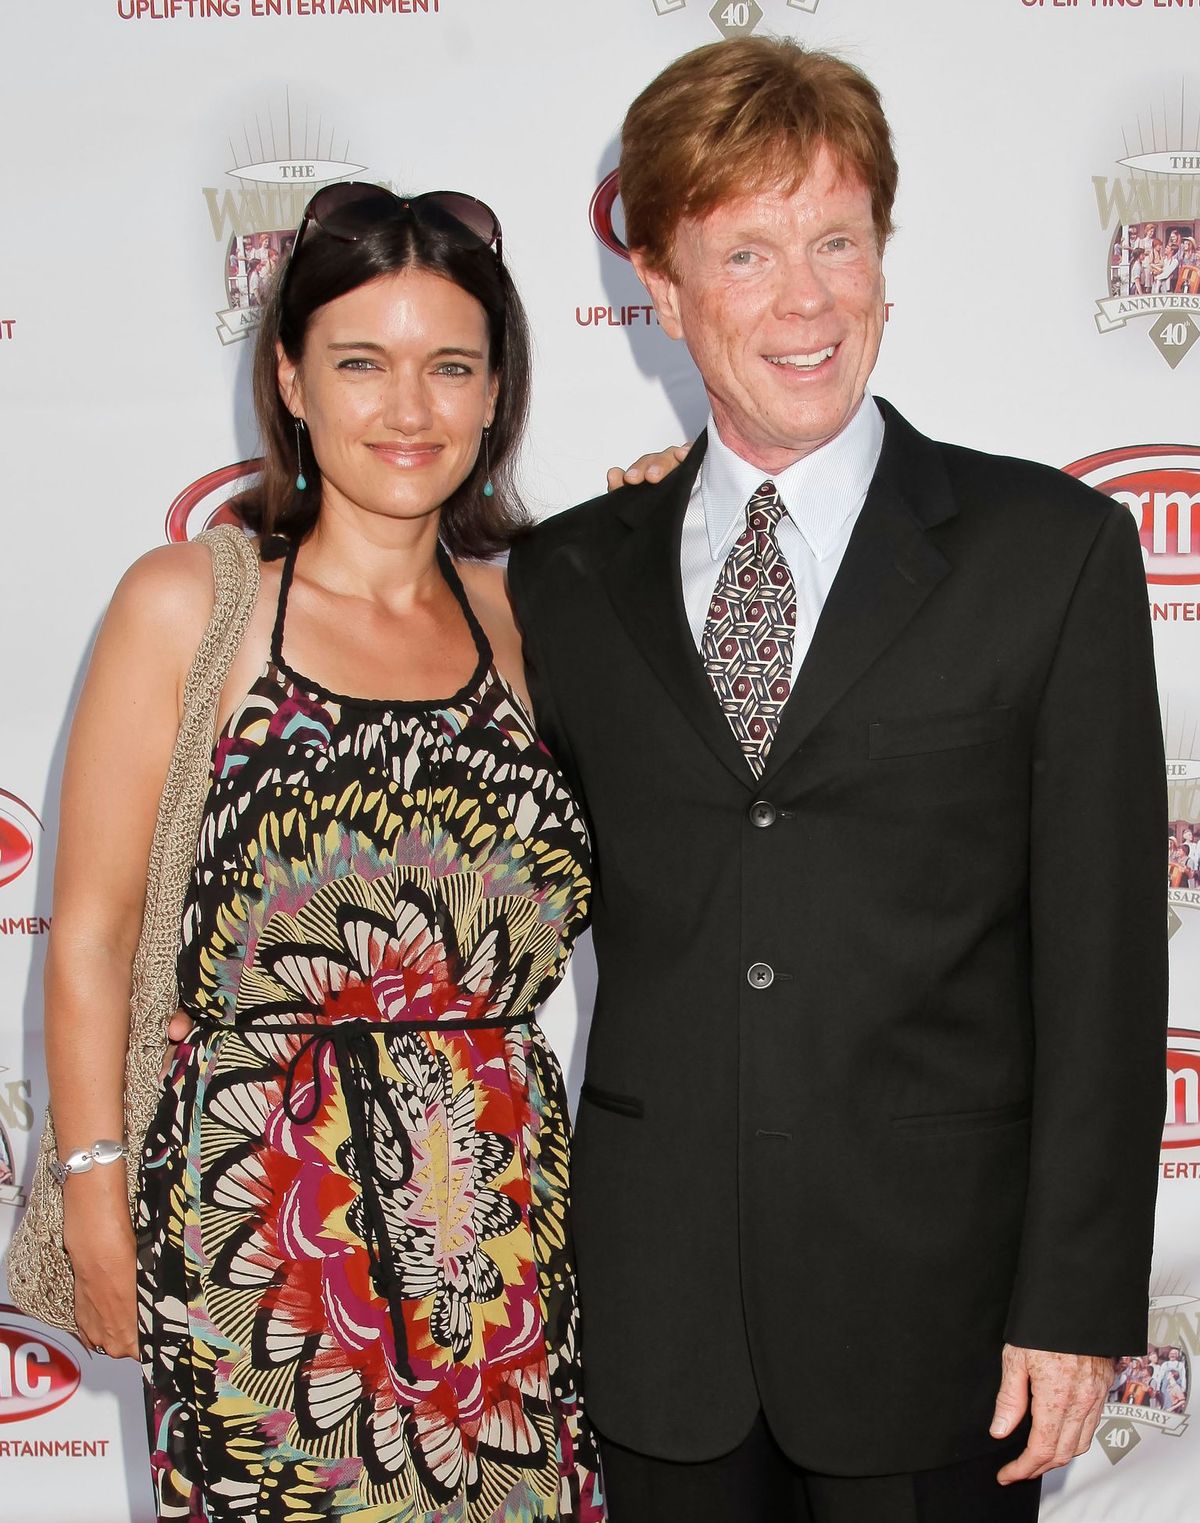 Jon Walmsley and a guest at the "The Waltons" 40th anniversary reunion on September 29, 2012, in Los Angeles, California | Photo: Tibrina Hobson/WireImage/Getty Images